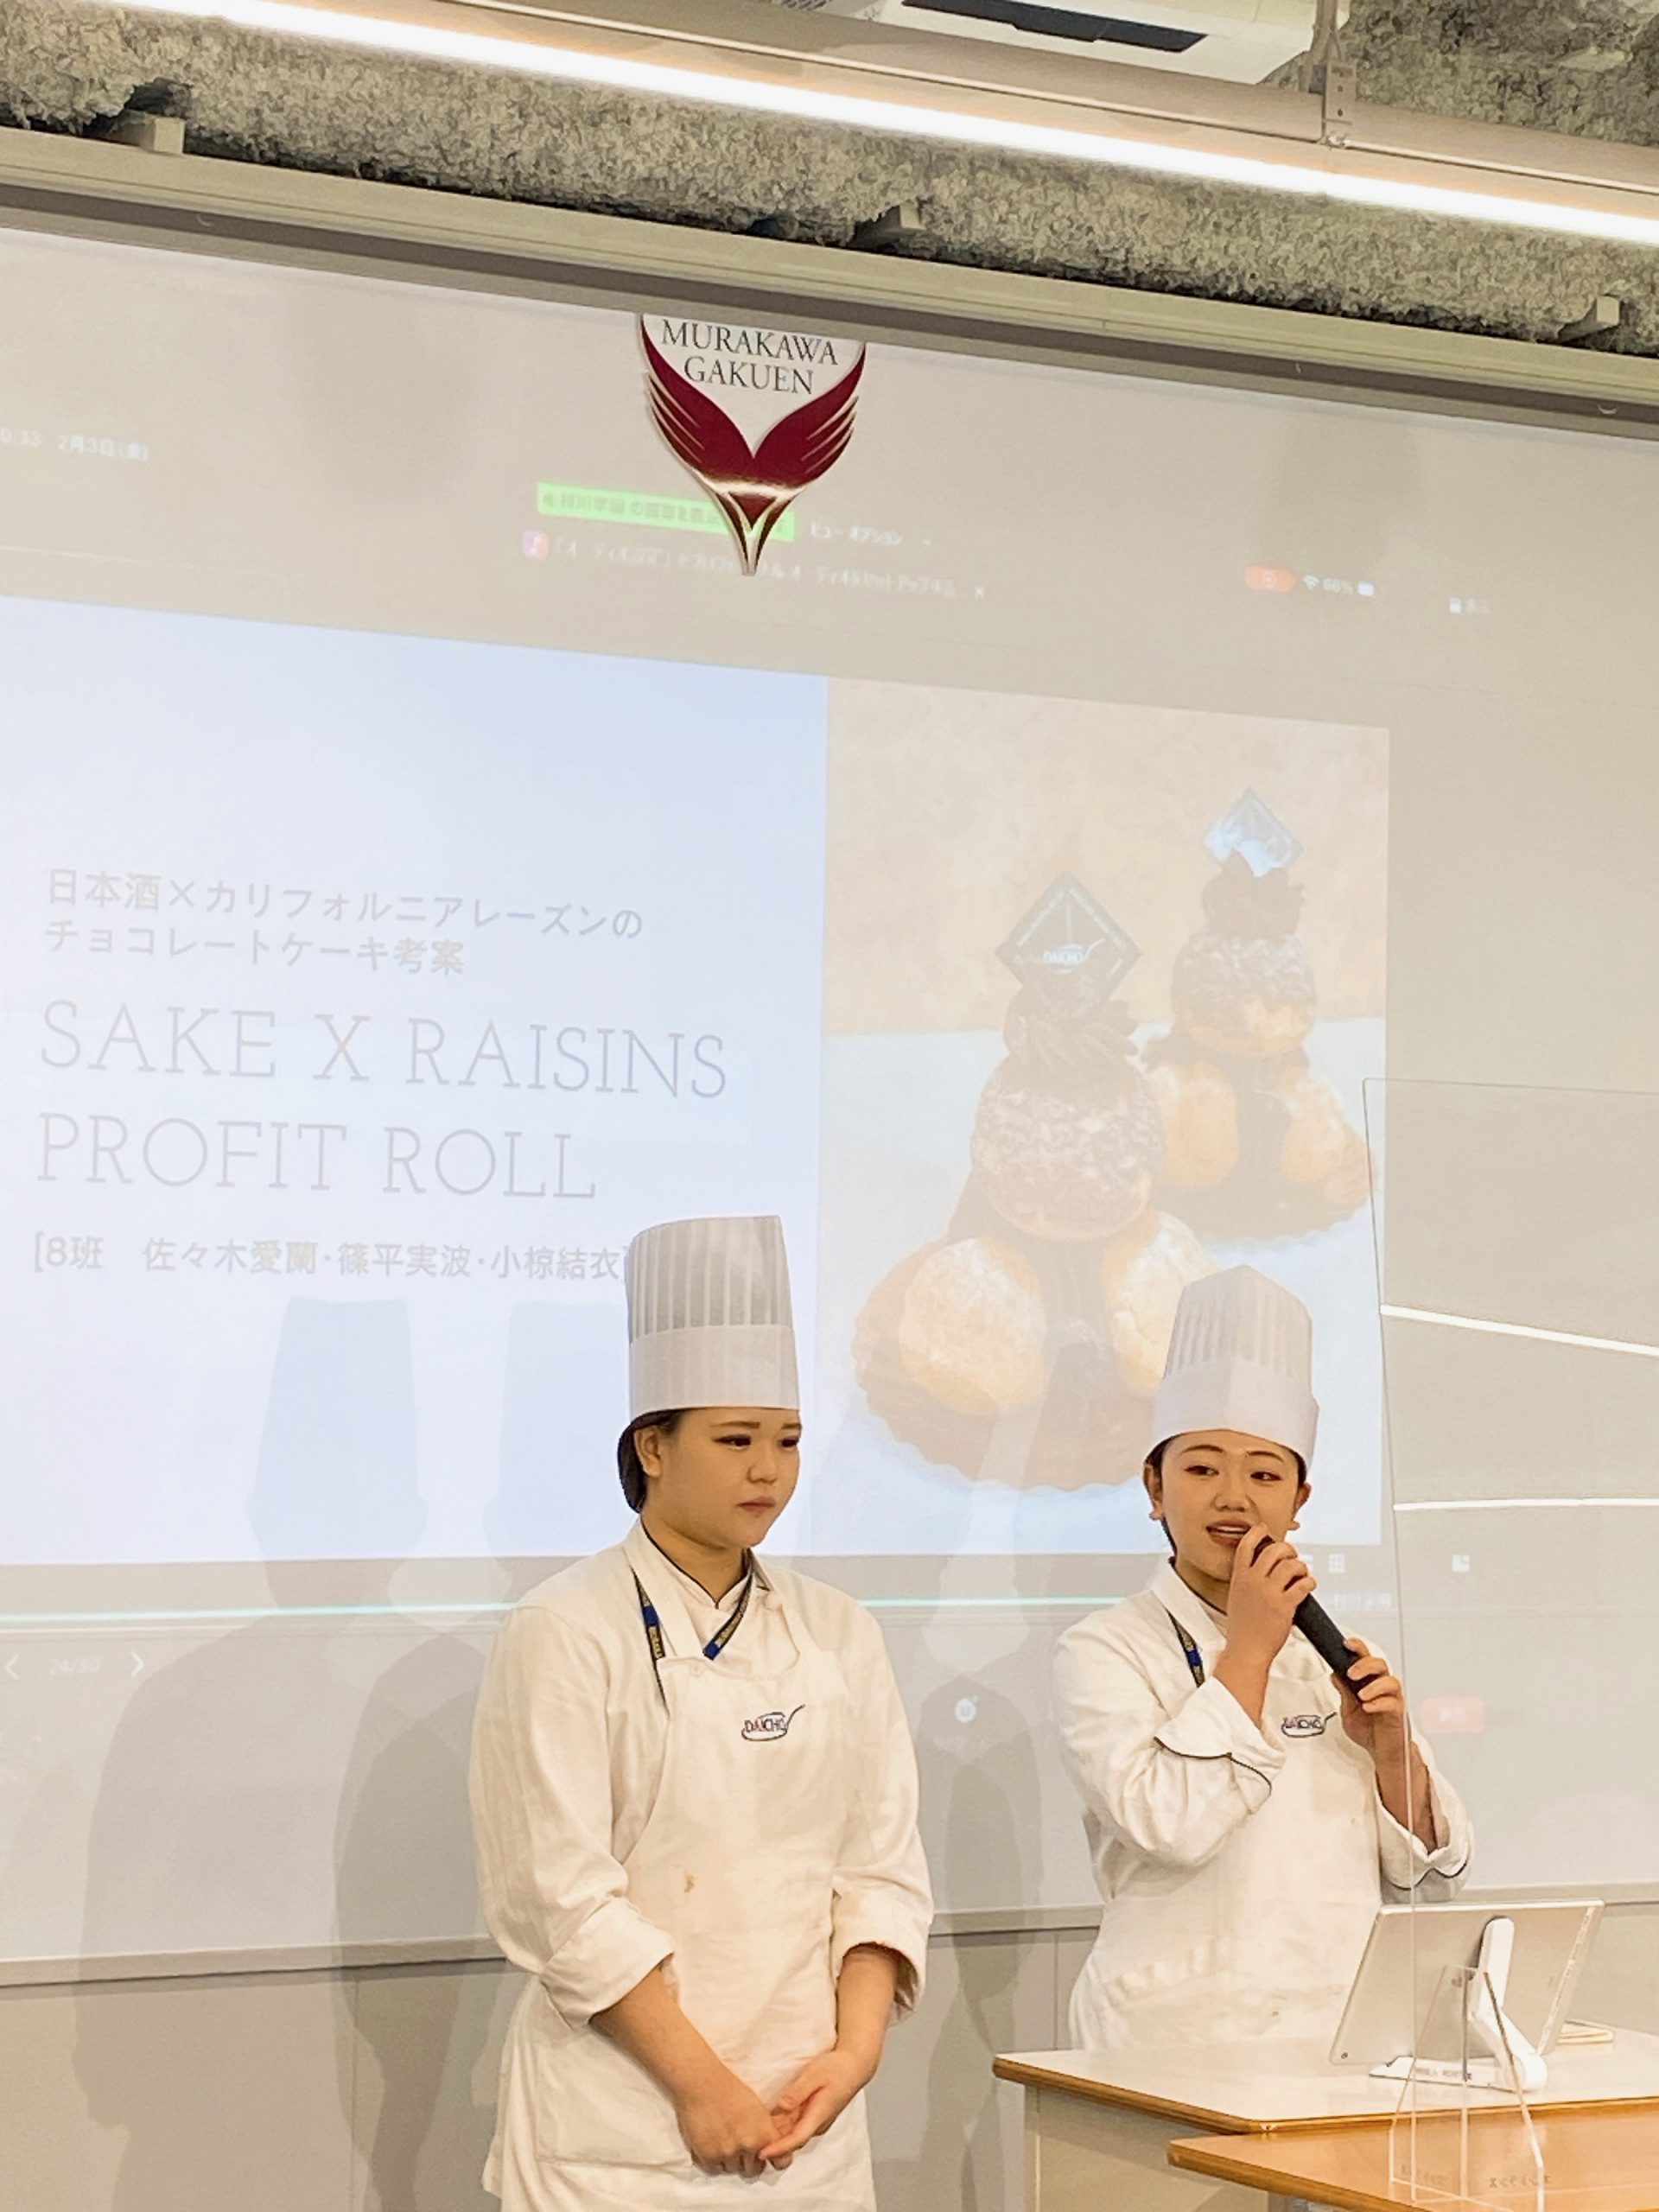 Student Competition at Osaka Pastry School